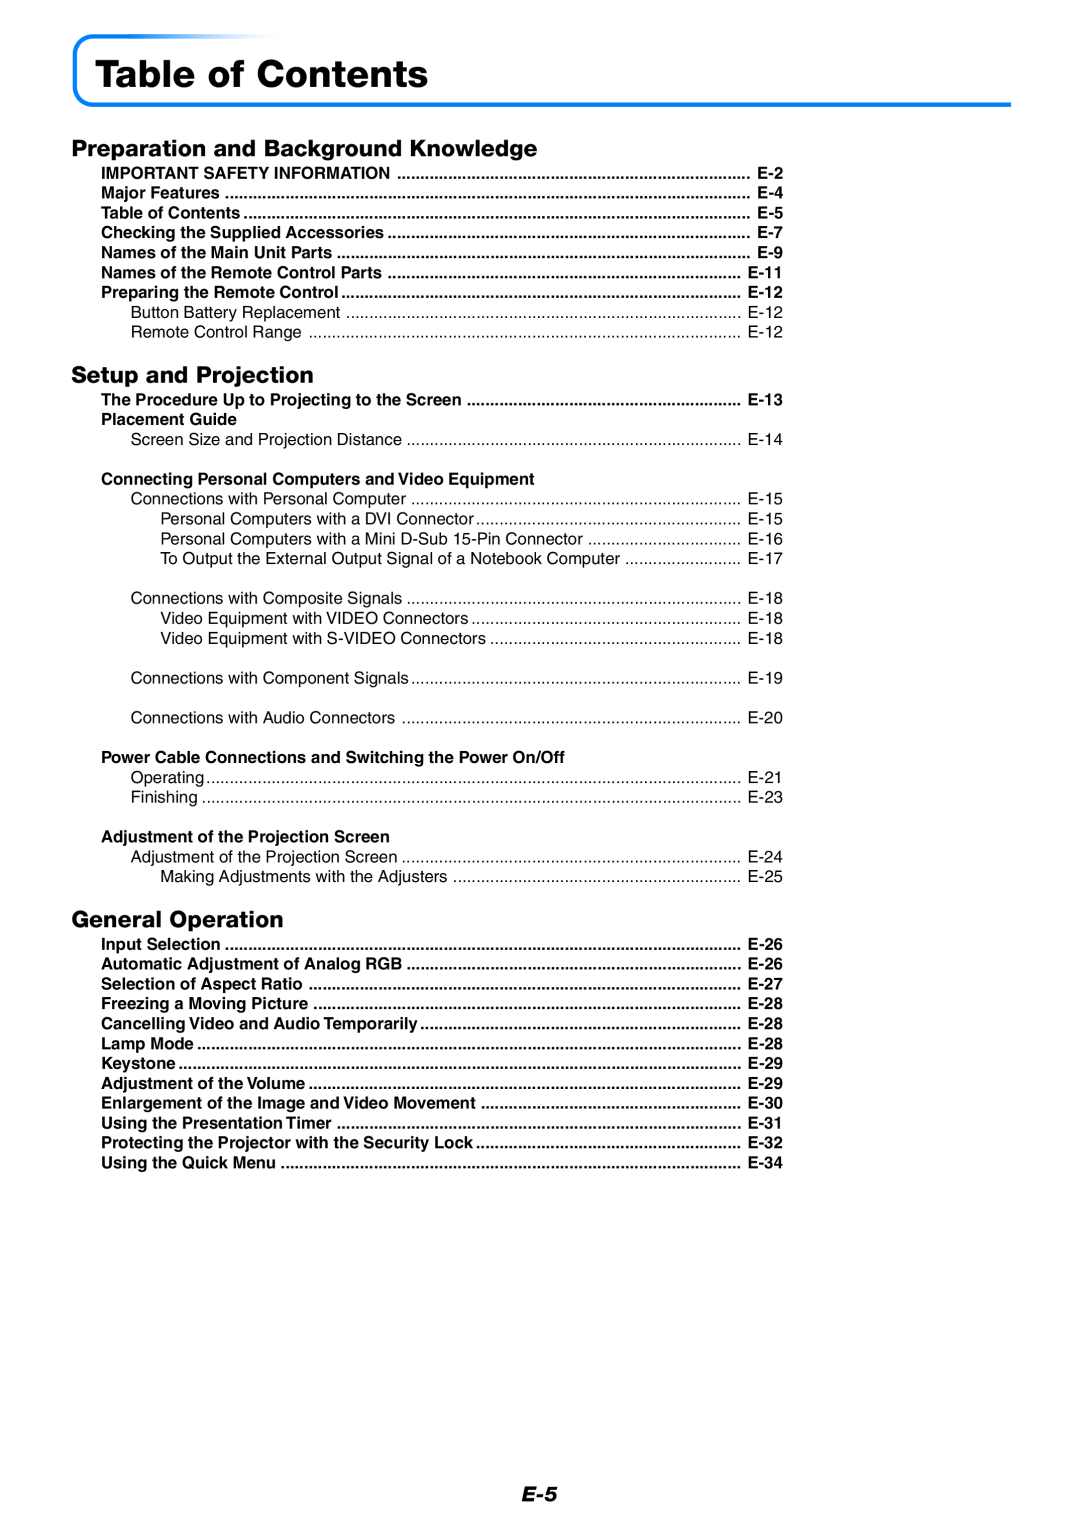 PLUS Vision U4-232 Table of Contents, Preparation and Background Knowledge, Setup and Projection, General Operation, E-11 